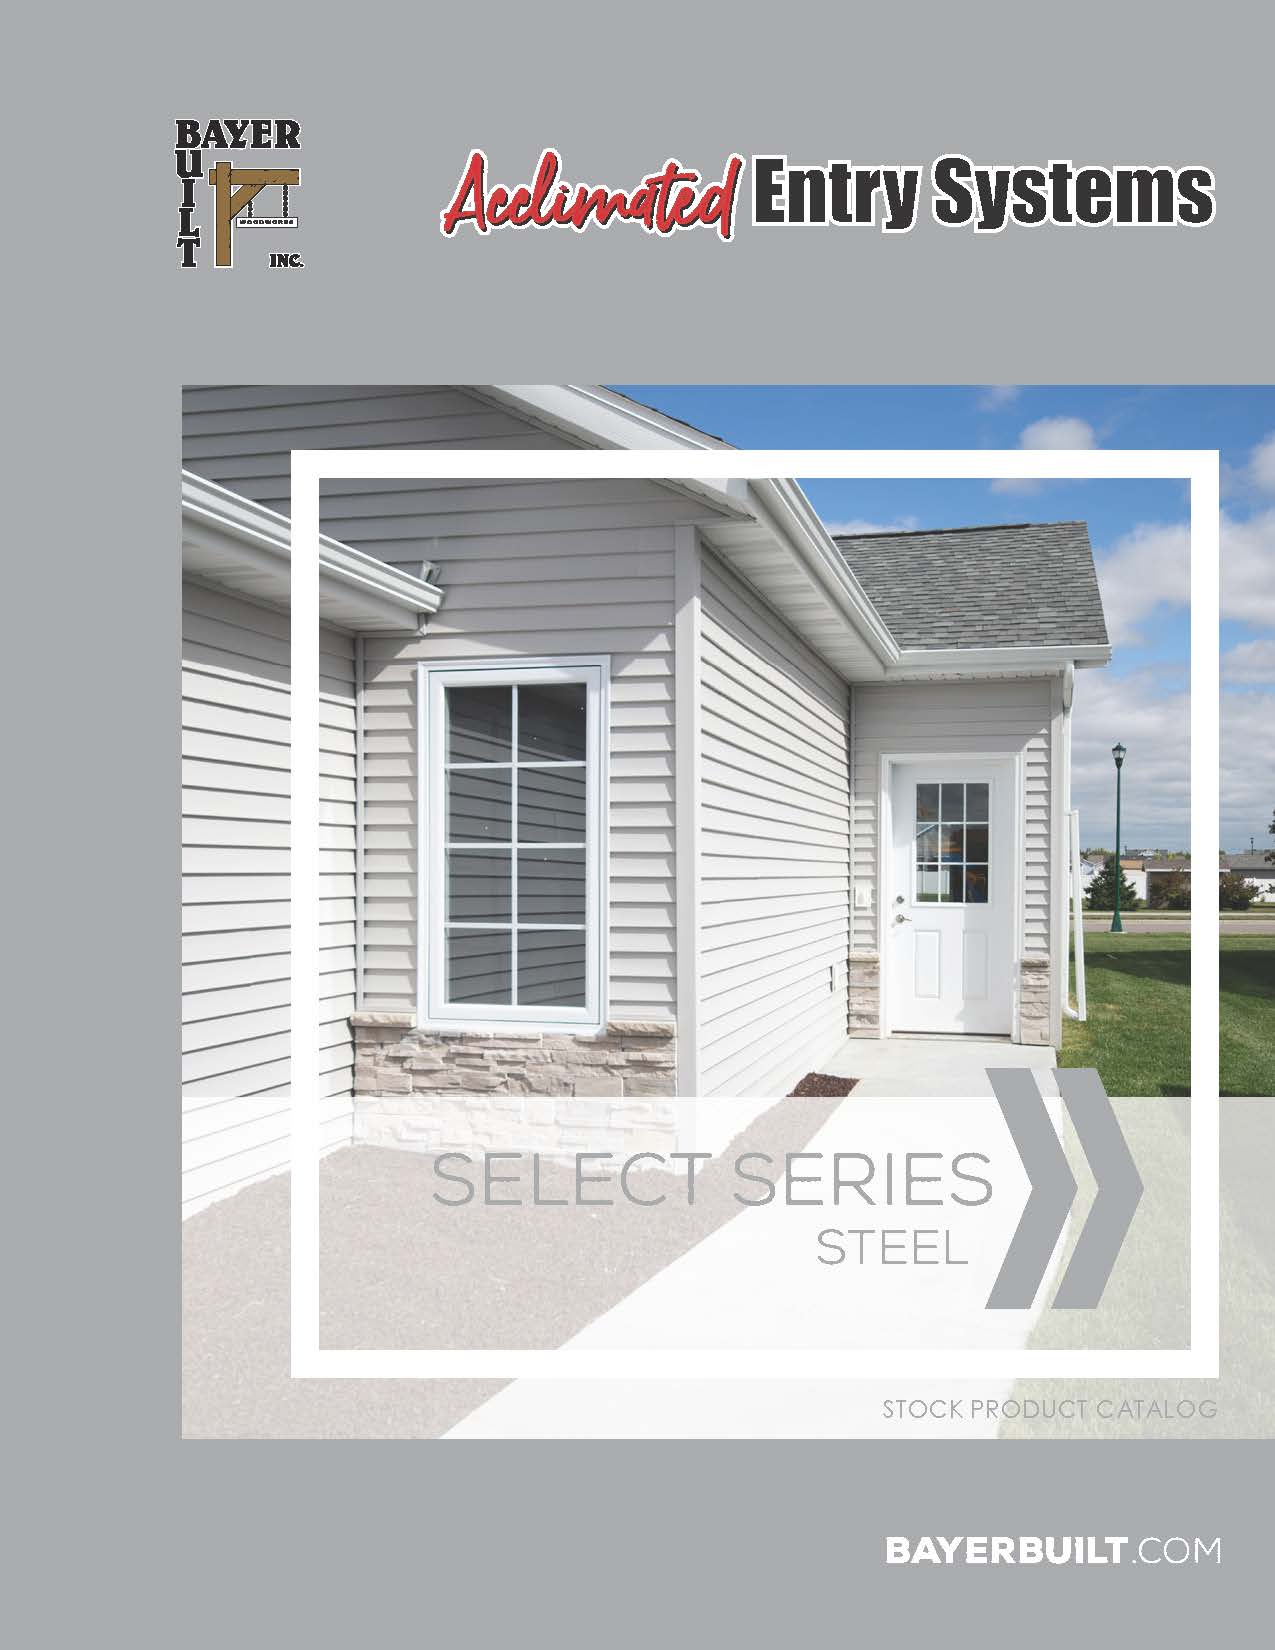 Select Series Steel | Acclimated Entry Systems